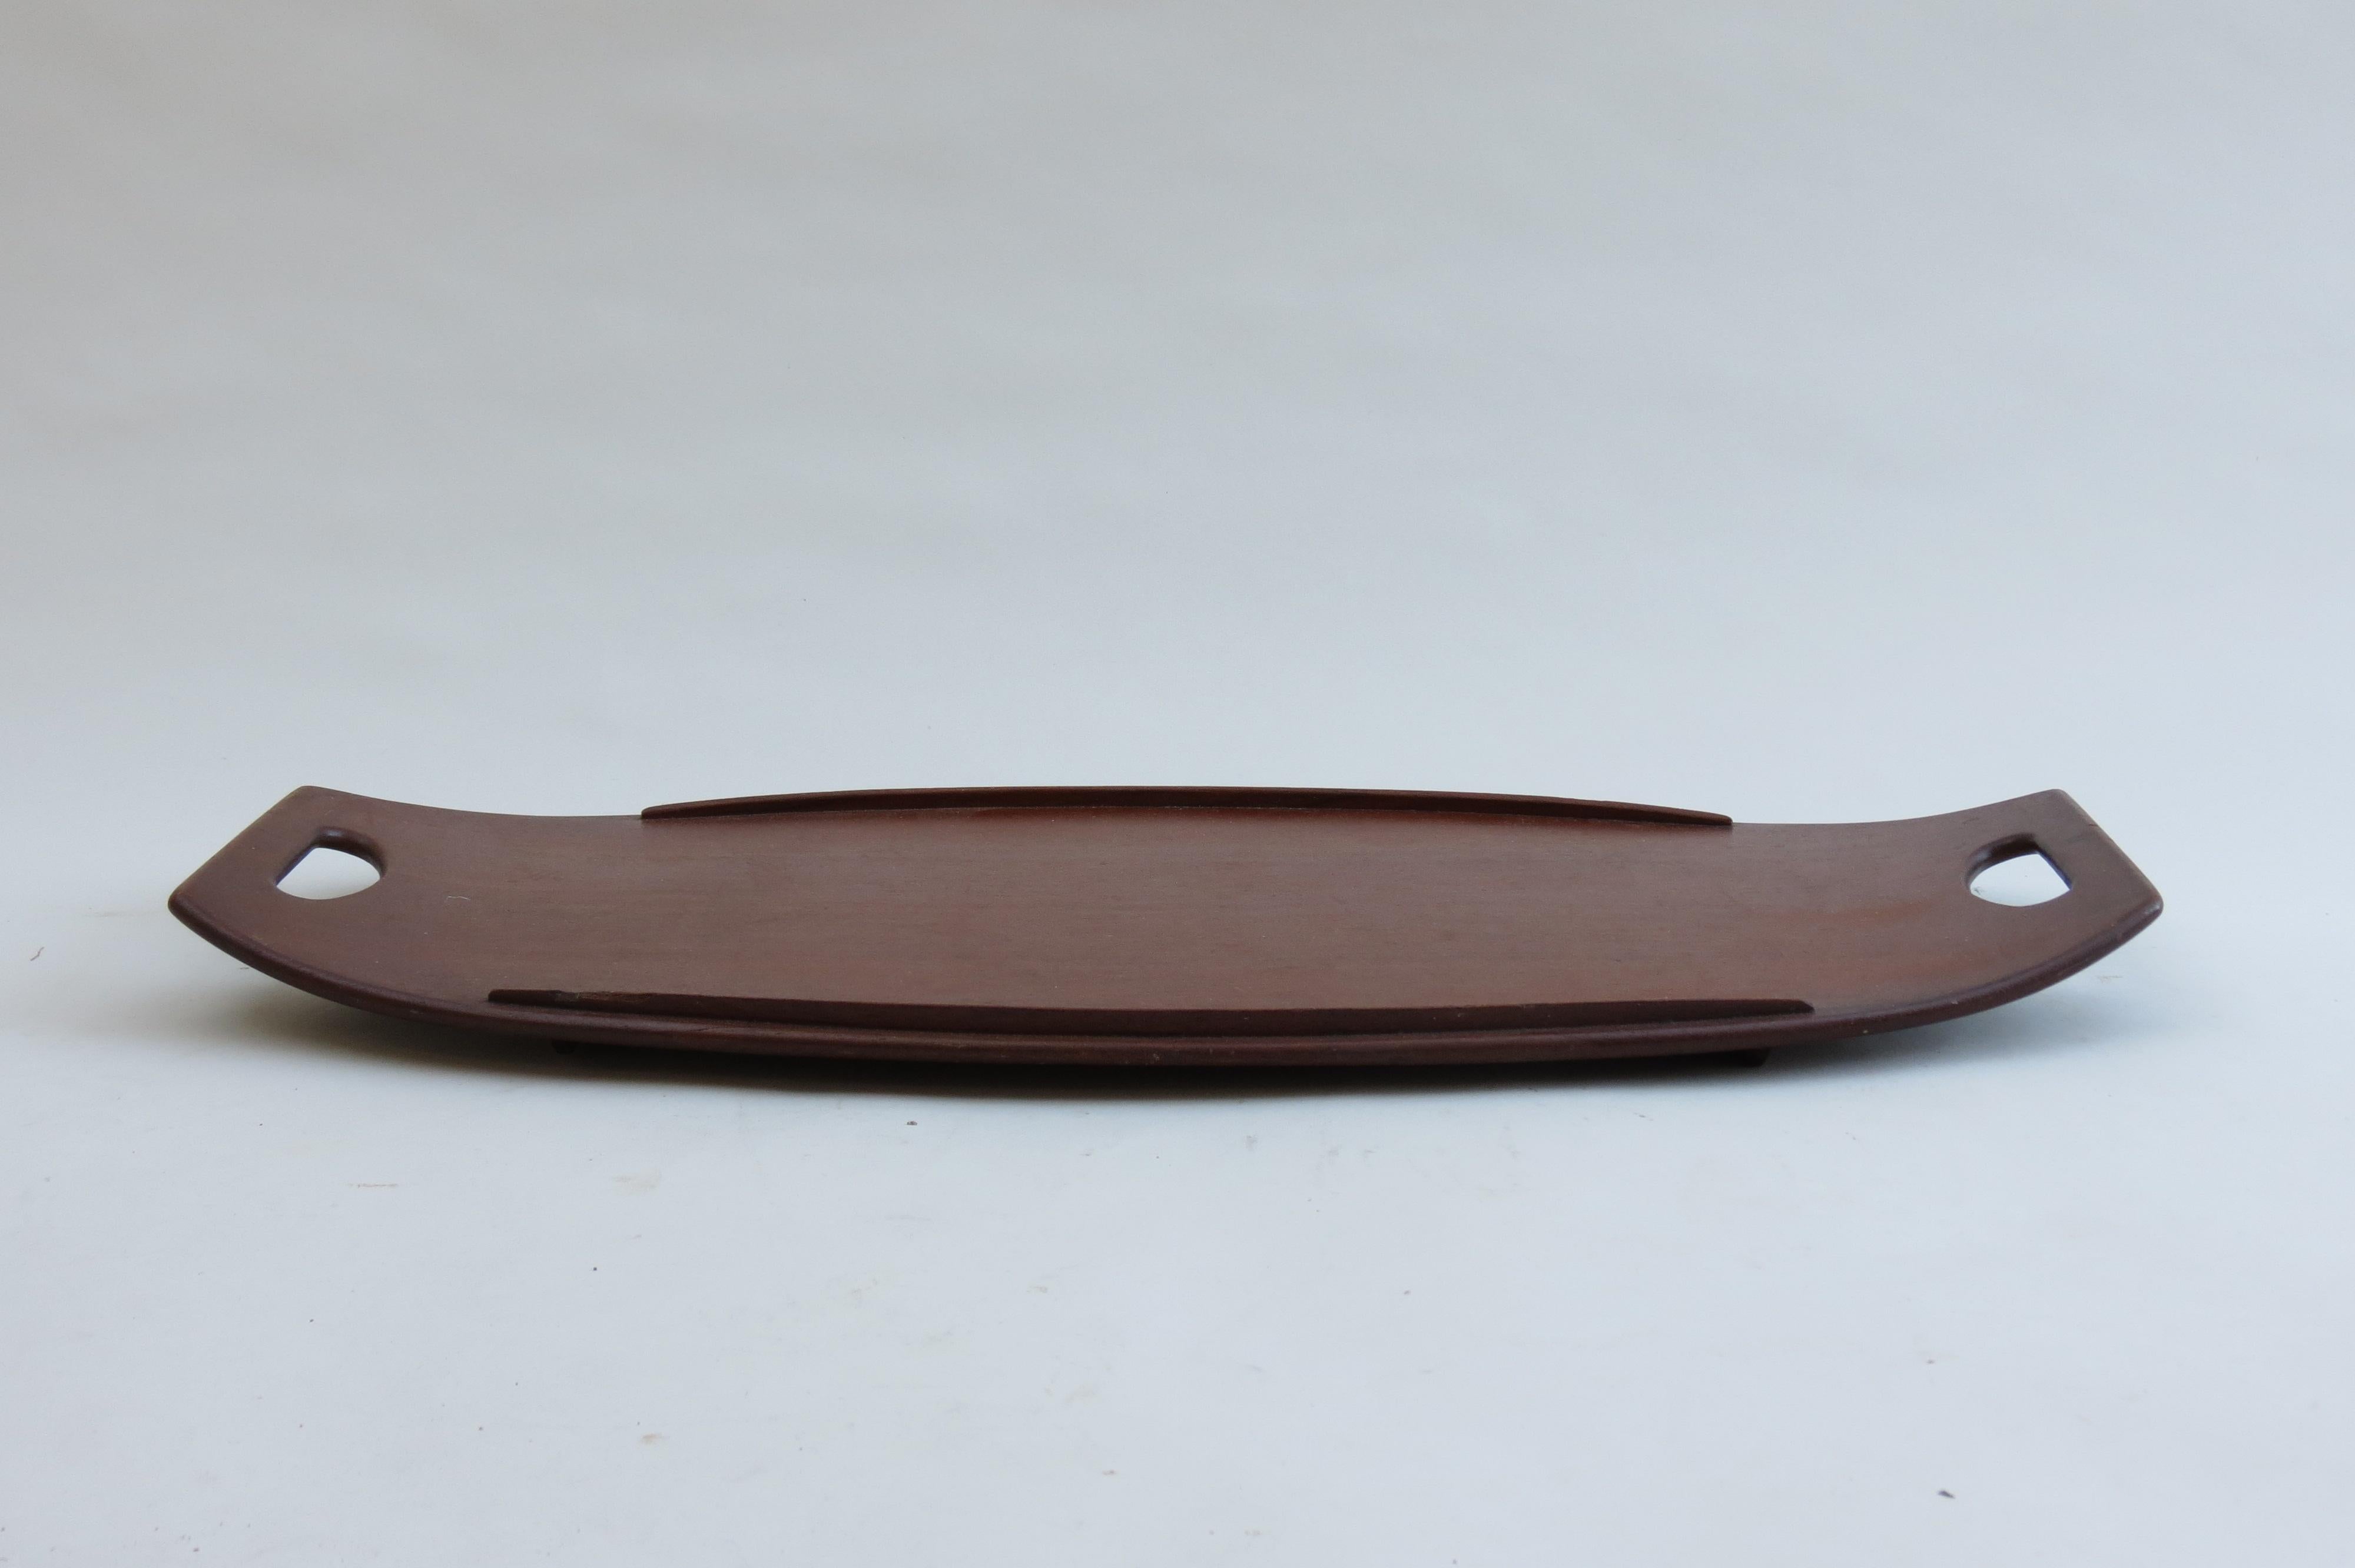 A large Teak tray designed by Jens Quistgaard for Dansk Design, Denmark. Dates from the 1960s.

In good vintage condition, a small amount of loss to one section of the edge of the rim on the tray. 

This piece is stamped to the underside of the